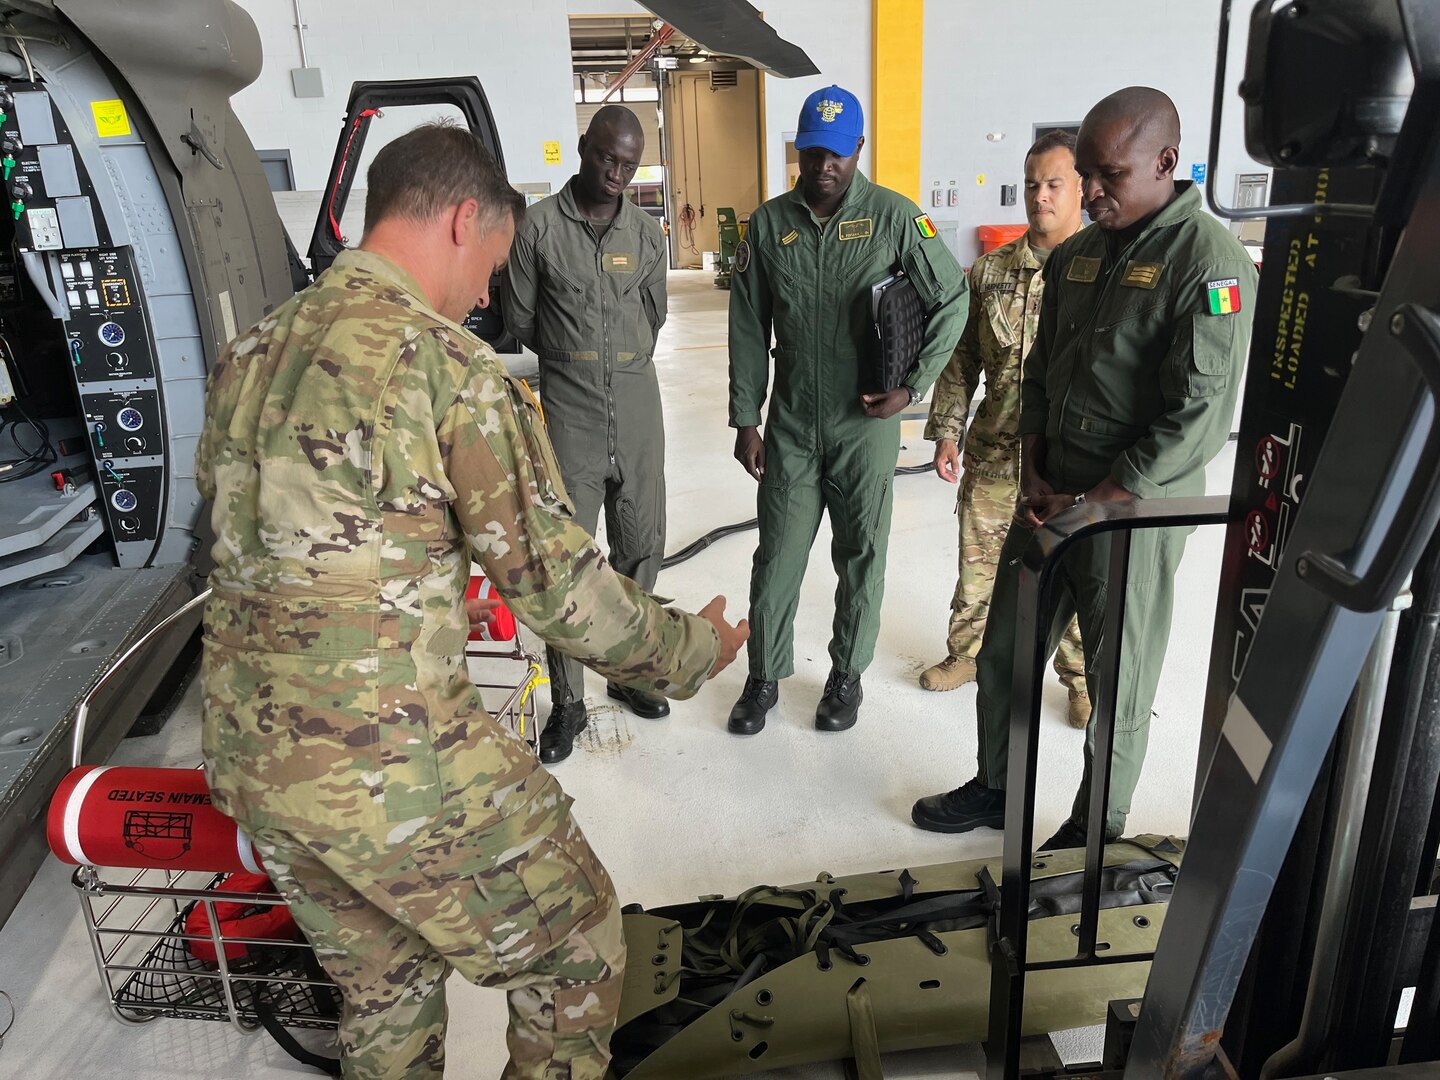 The Vermont Army National Guard hosted 3 Senegalese Air Force pilots July 17-22, 2022, to conduct safety, operations, and maintenance cross-training with VTARNG’s Aviators during a State Partnership Program visit. The Department of Defense’s State Partnership Program pairs U.S. state National Guard units with other nations to facilitate international civil-military relationships. (U.S. Army National Guard photo by Sgt. 1st Class Jason Alvarez)